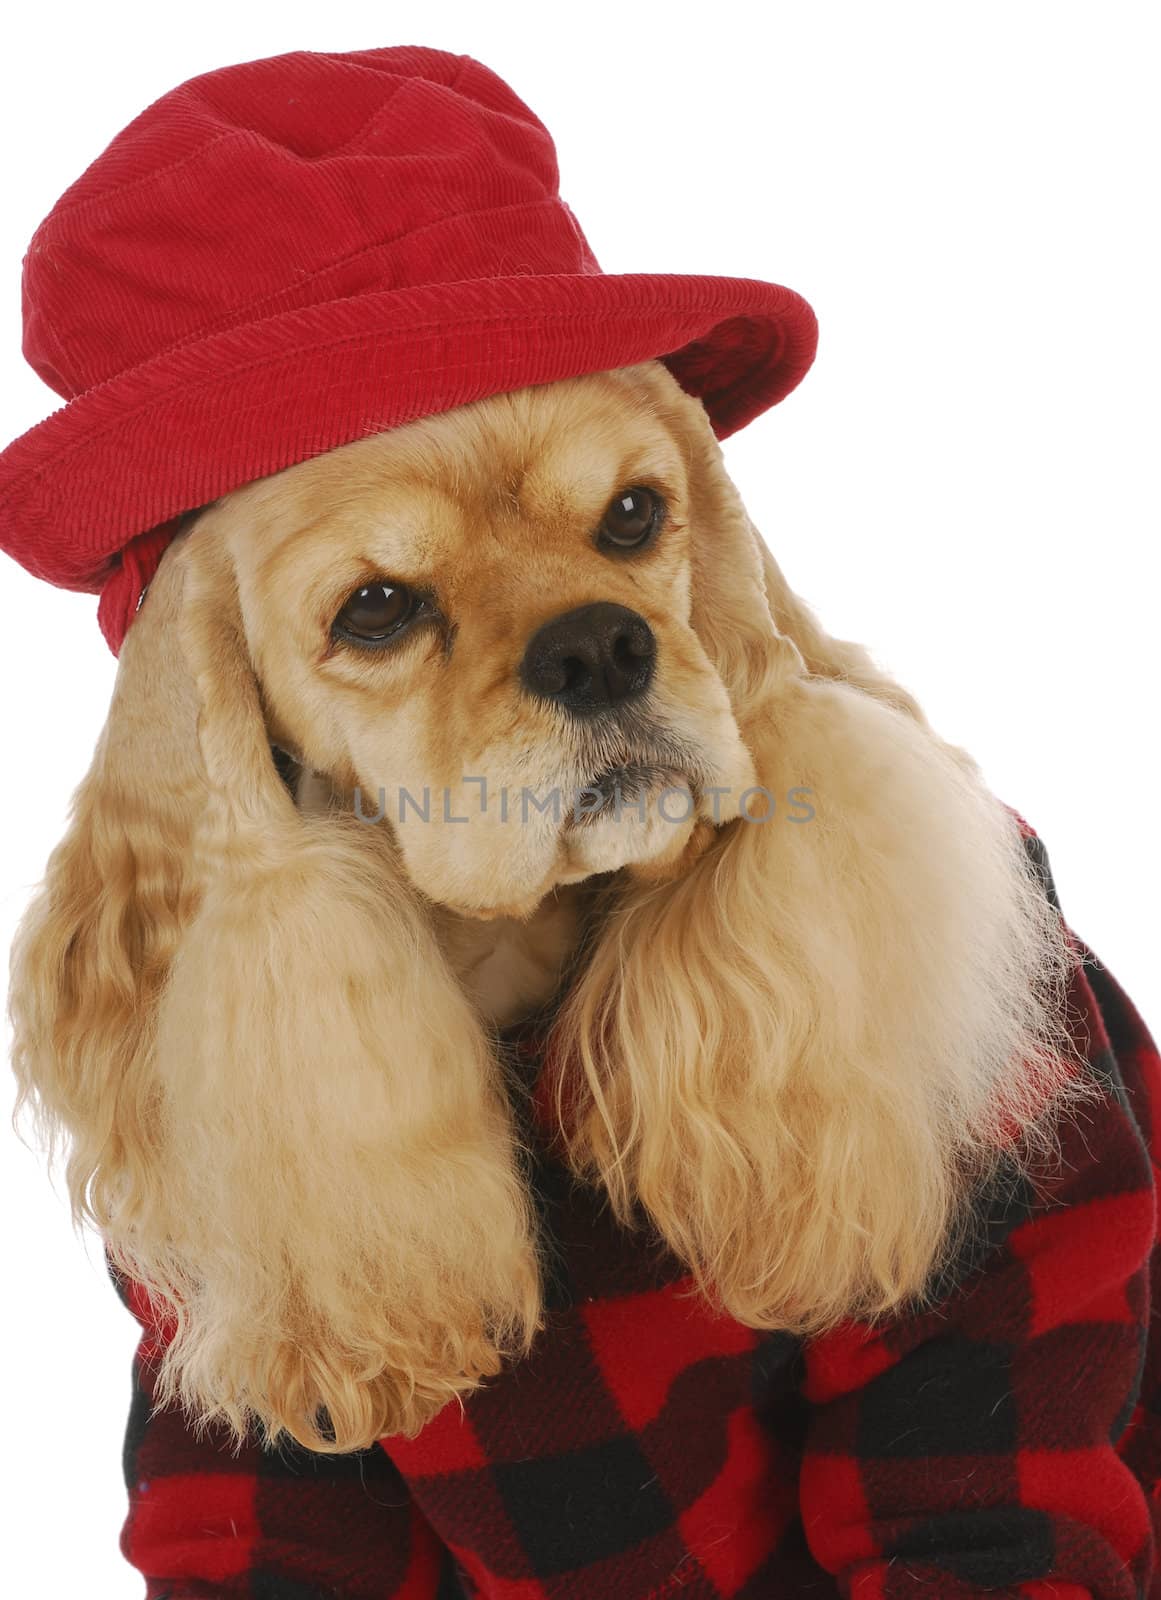 adorable cocker spaniel wearing red hat and coat on white background